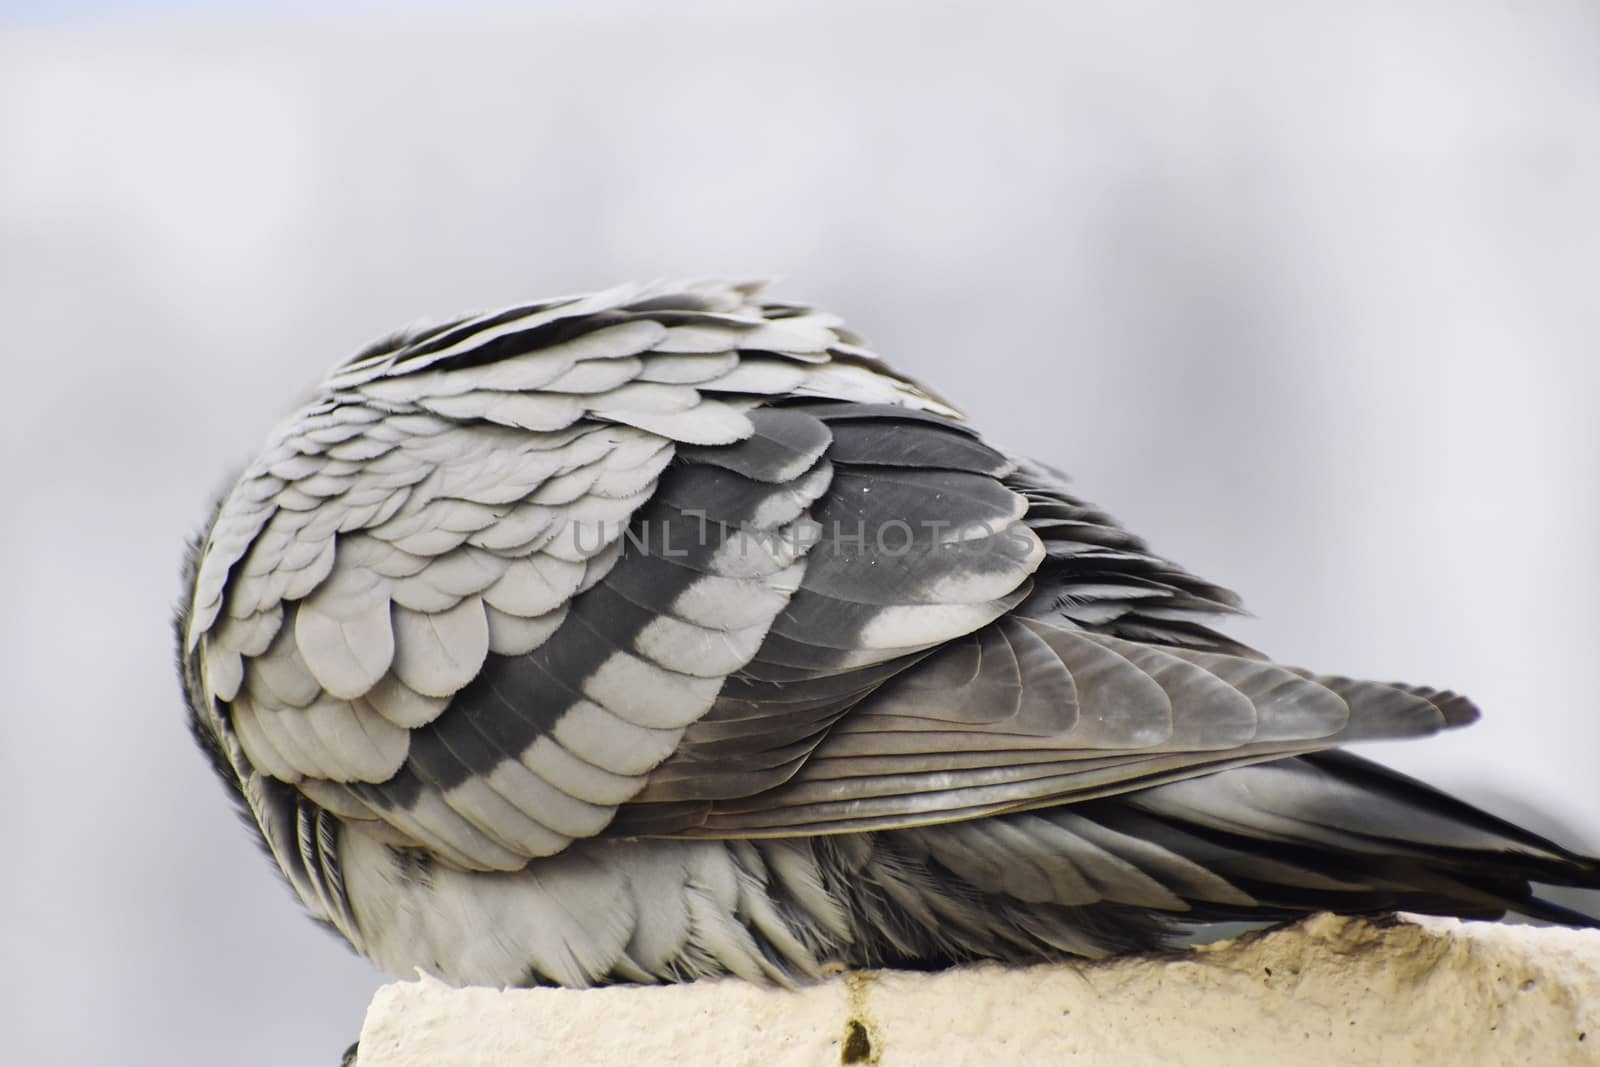 A pigeon siting on wall of my roof by ravindrabhu165165@gmail.com